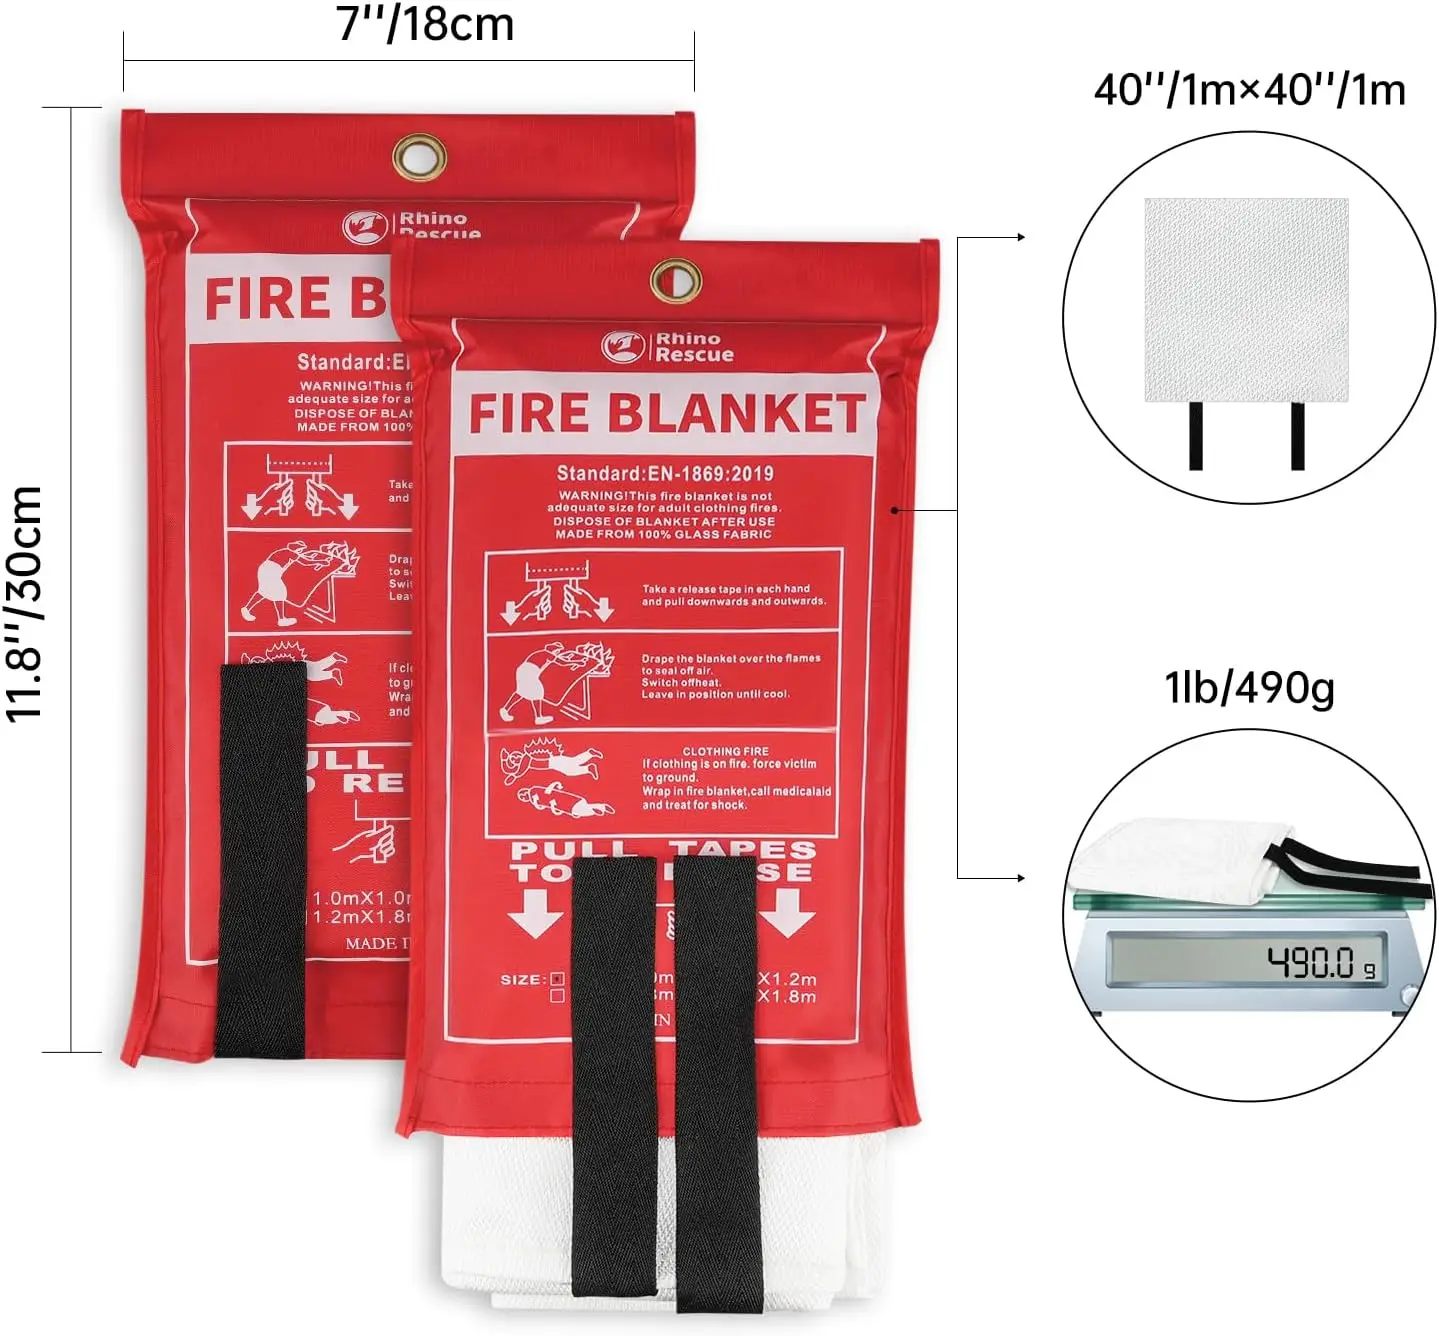 

Rhino Rescue Fire Blanket 40'*40'' Fiberglass Emergency Fireproof Gear Flame Retardant Protection for Home Kitchen Camping